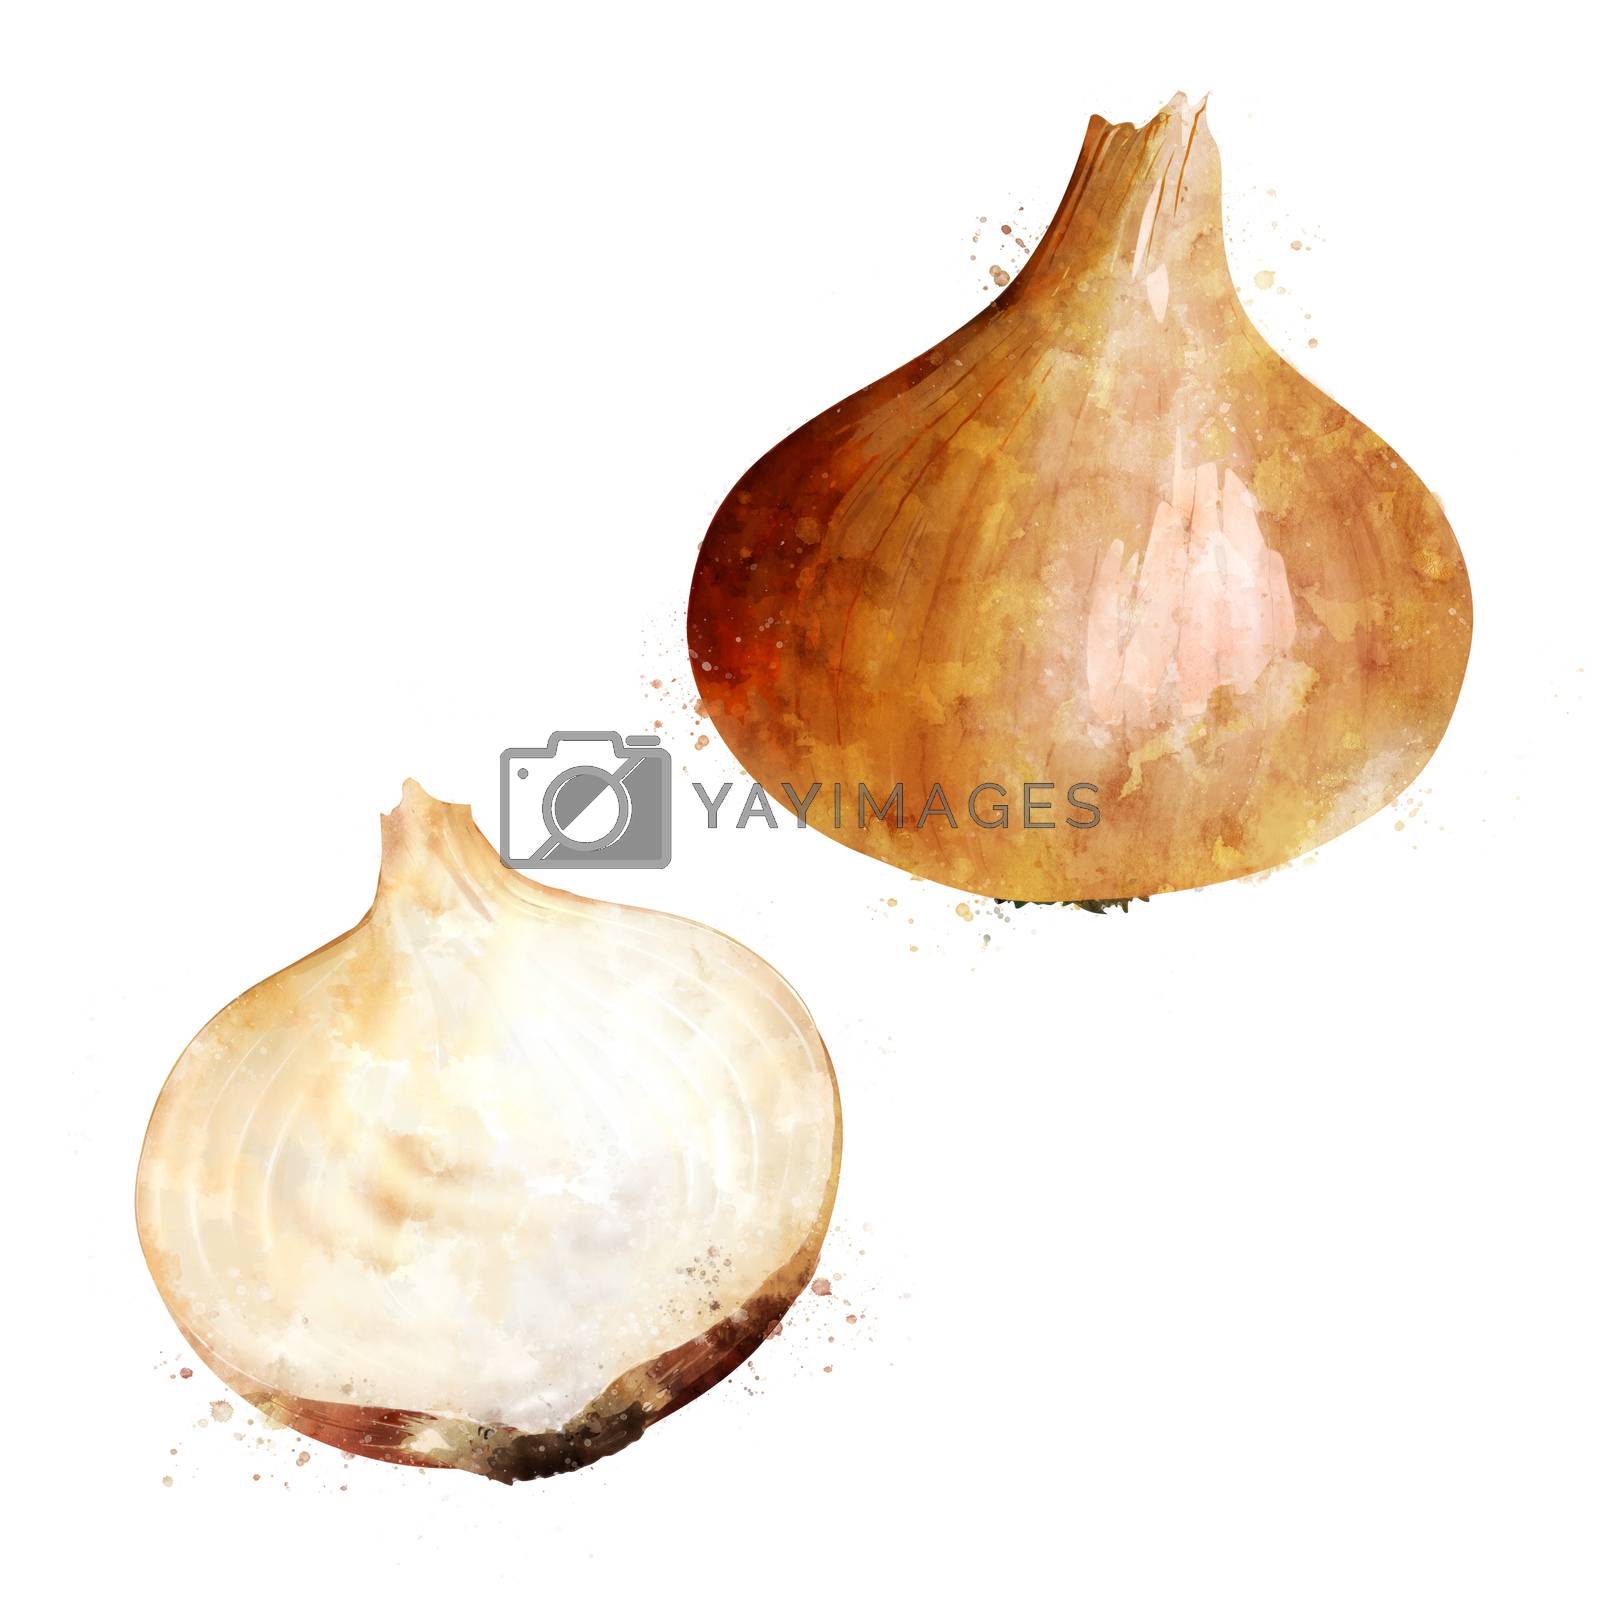 Royalty free image of Onion on white background. Watercolor illustration by ConceptCafe